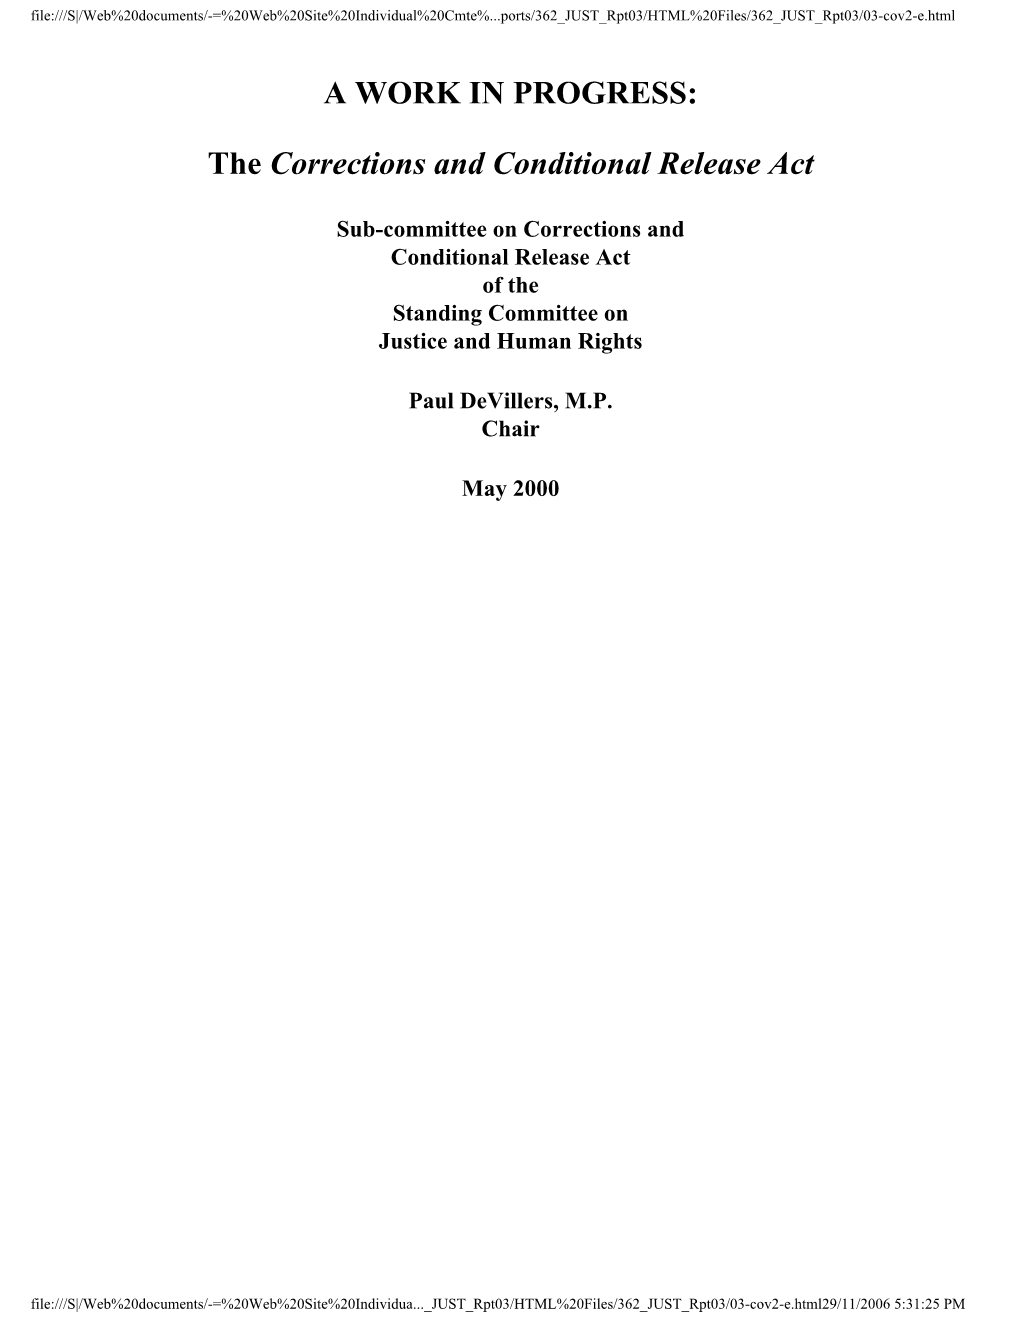 A Work in Progress: the Corrections and Conditional Release Act